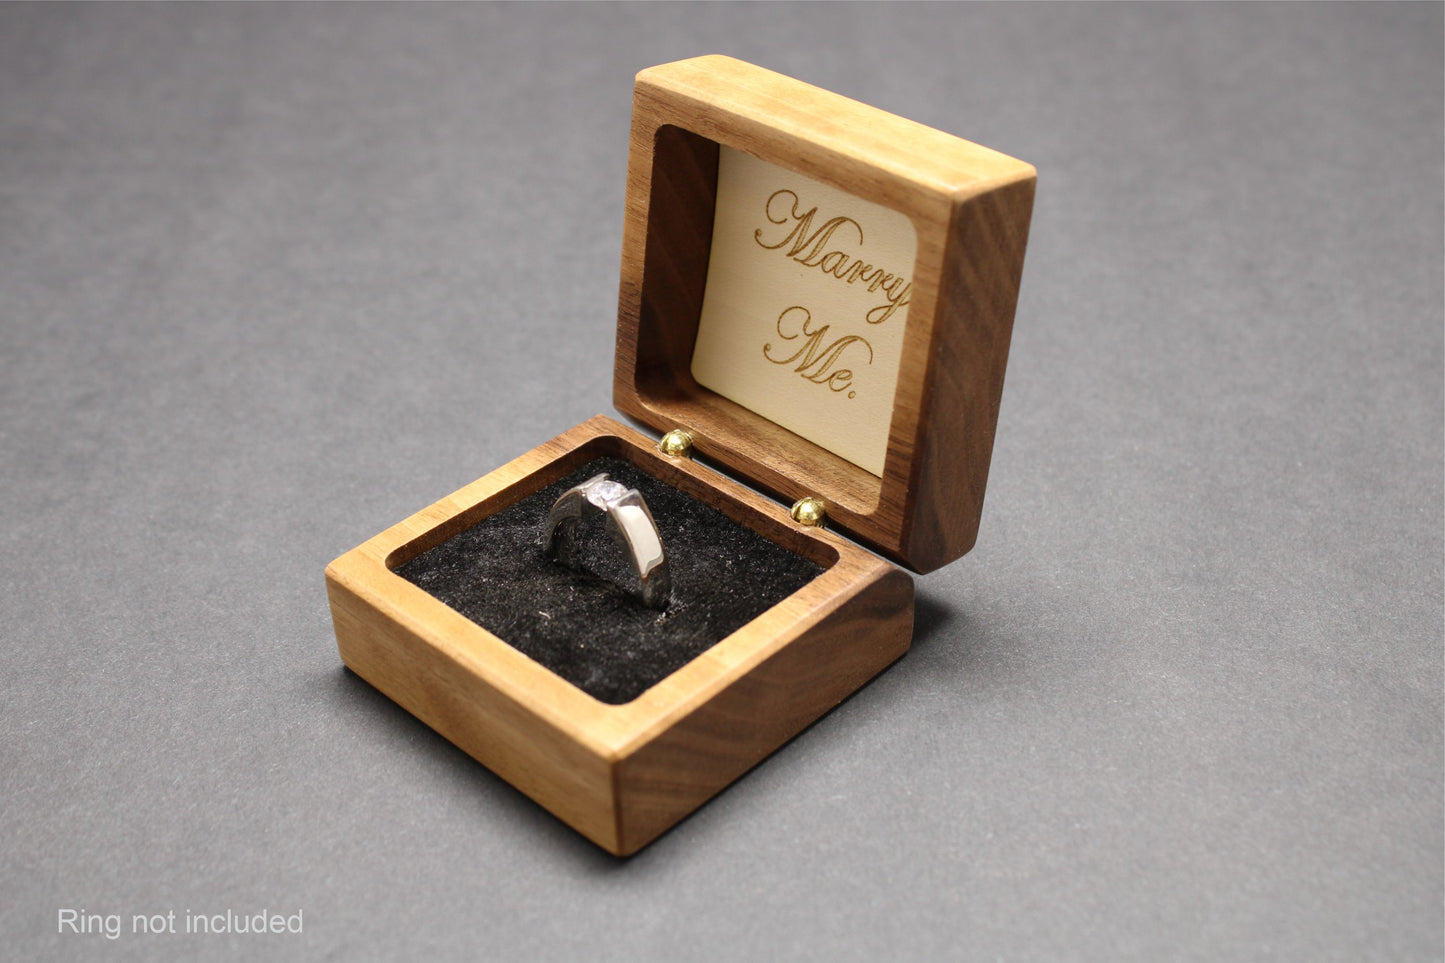 Handcrafted Walnut Ring Box  "Rabbit"  RB-30  Made in the U.S.